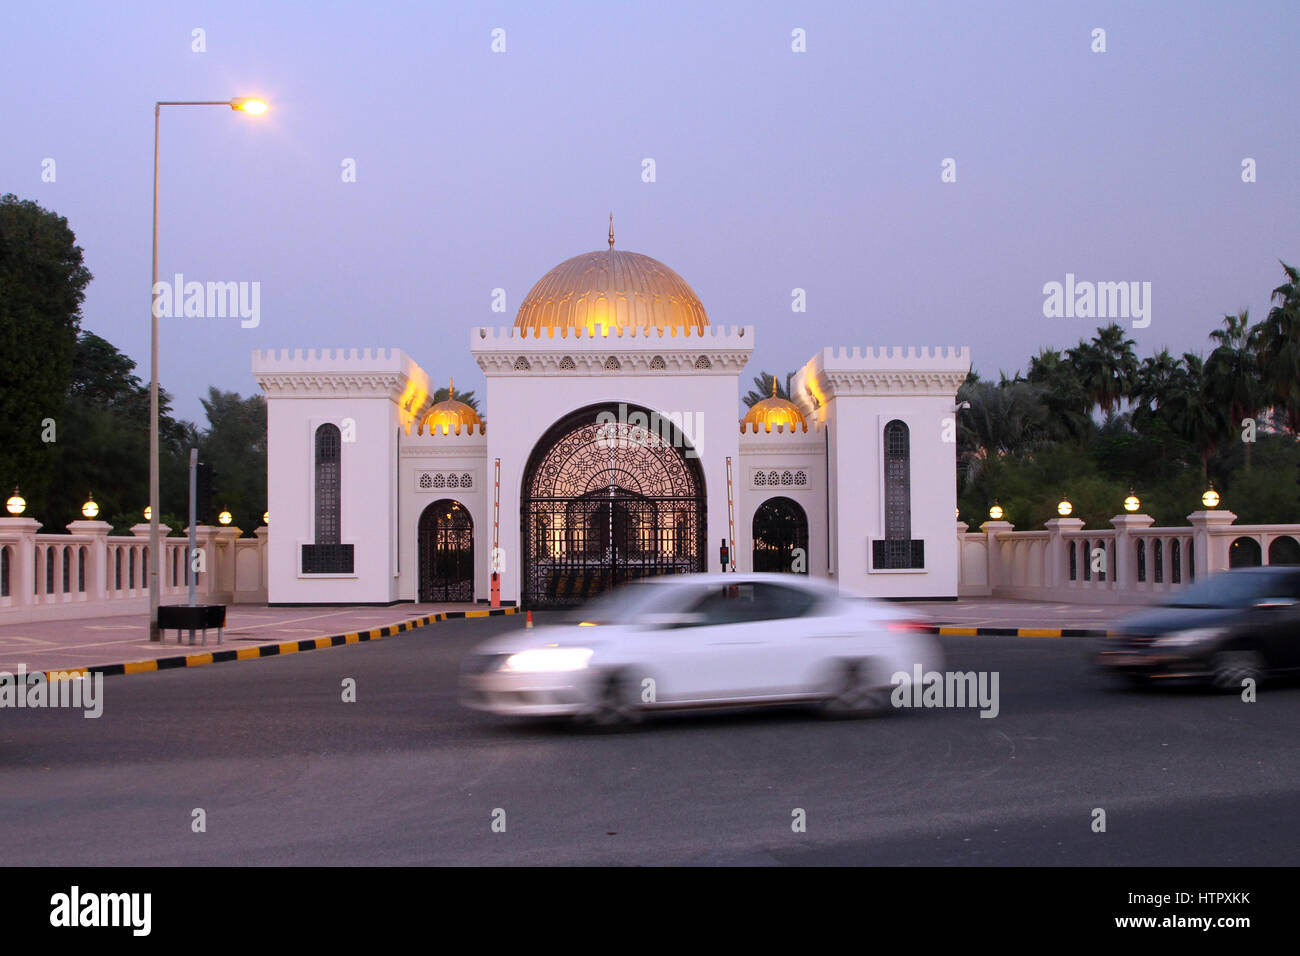 Cars drive past the entrance to the Al Qudaibiya Palace in the evening light, in the Gudaibiya district of Manama, Bahrain. Stock Photo